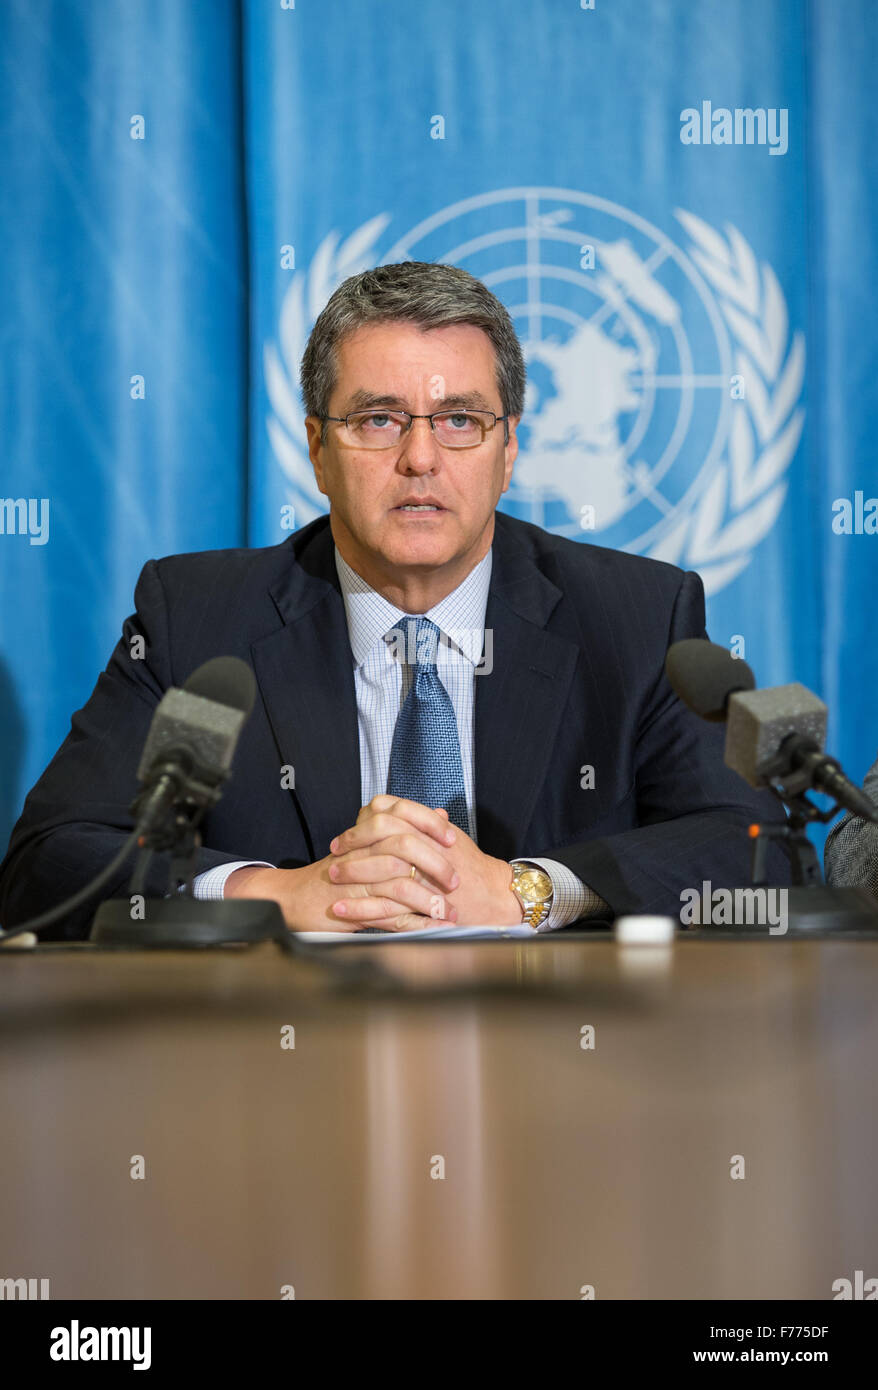 (151126) -- GENEVA, Nov. 26, 2015 (Xinhua) -- World Trade Organization (WTO) Director-General Roberto Azevedo addresses a news conference in Geneva, Switzerland, Nov. 26, 2015. Speaking ahead of the 10th WTO Ministerial Conference in Nairobi, Roberto Azevedo told press on Friday that "if anything comes out of Nairobi, we will have to fight for it and fight hard for outcomes". The first such conference held in Africa, Nairobi will host ministers from across the globe from Dec. 15 to Dec. 18, 2015. (Xinhua/Xu Jinquan) Stock Photo